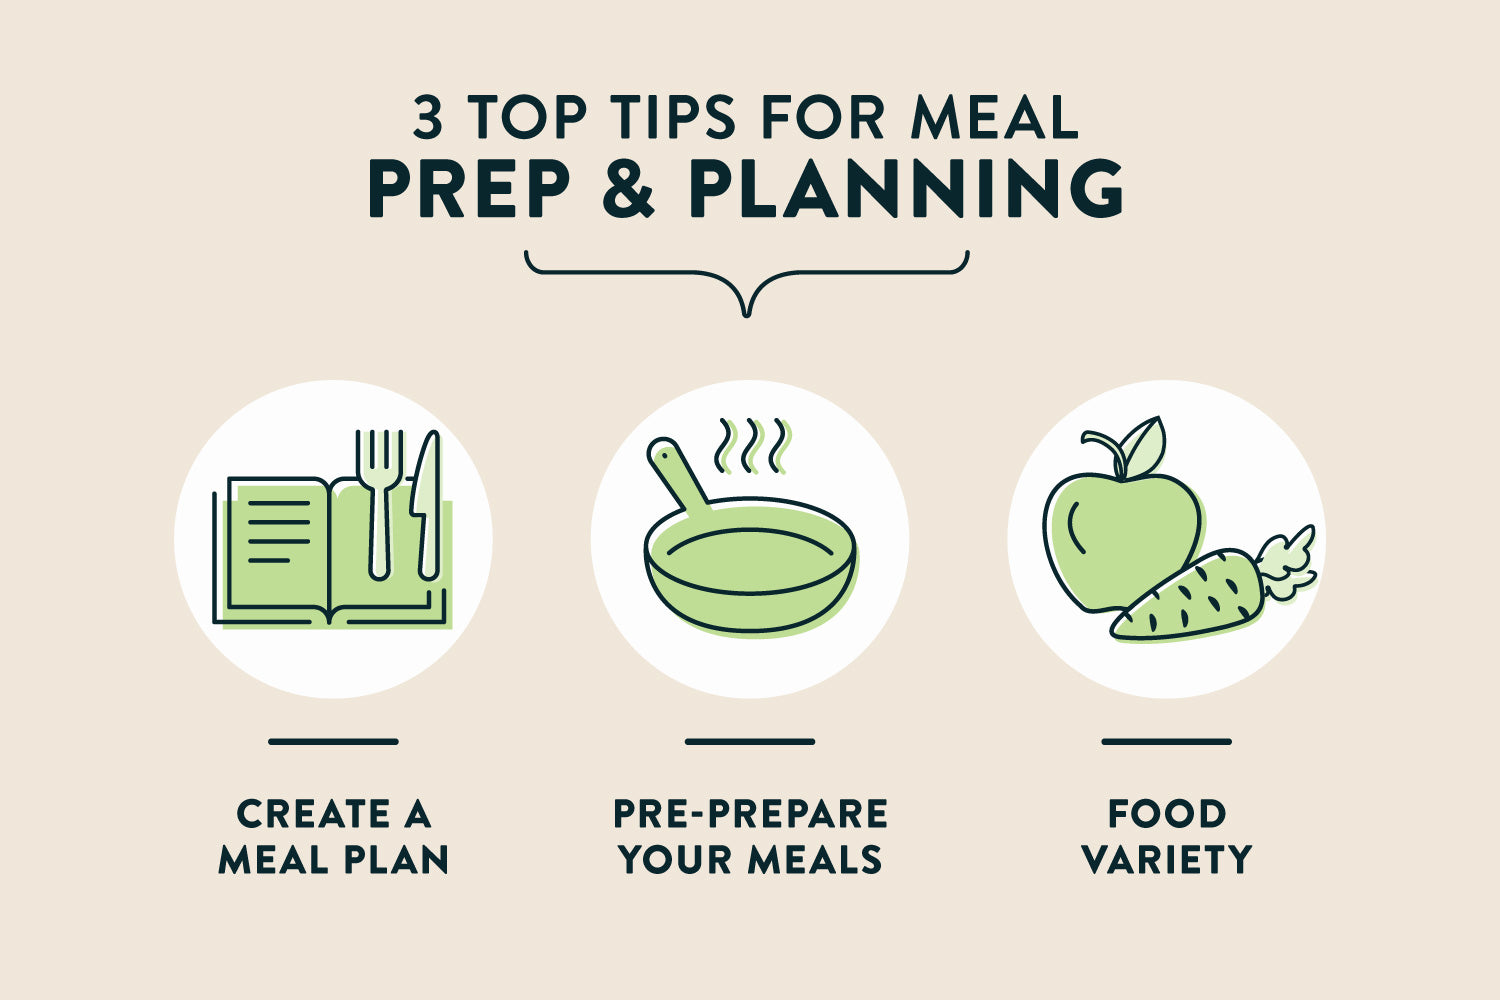 How to Meal Prep and Meal Plan for the Week